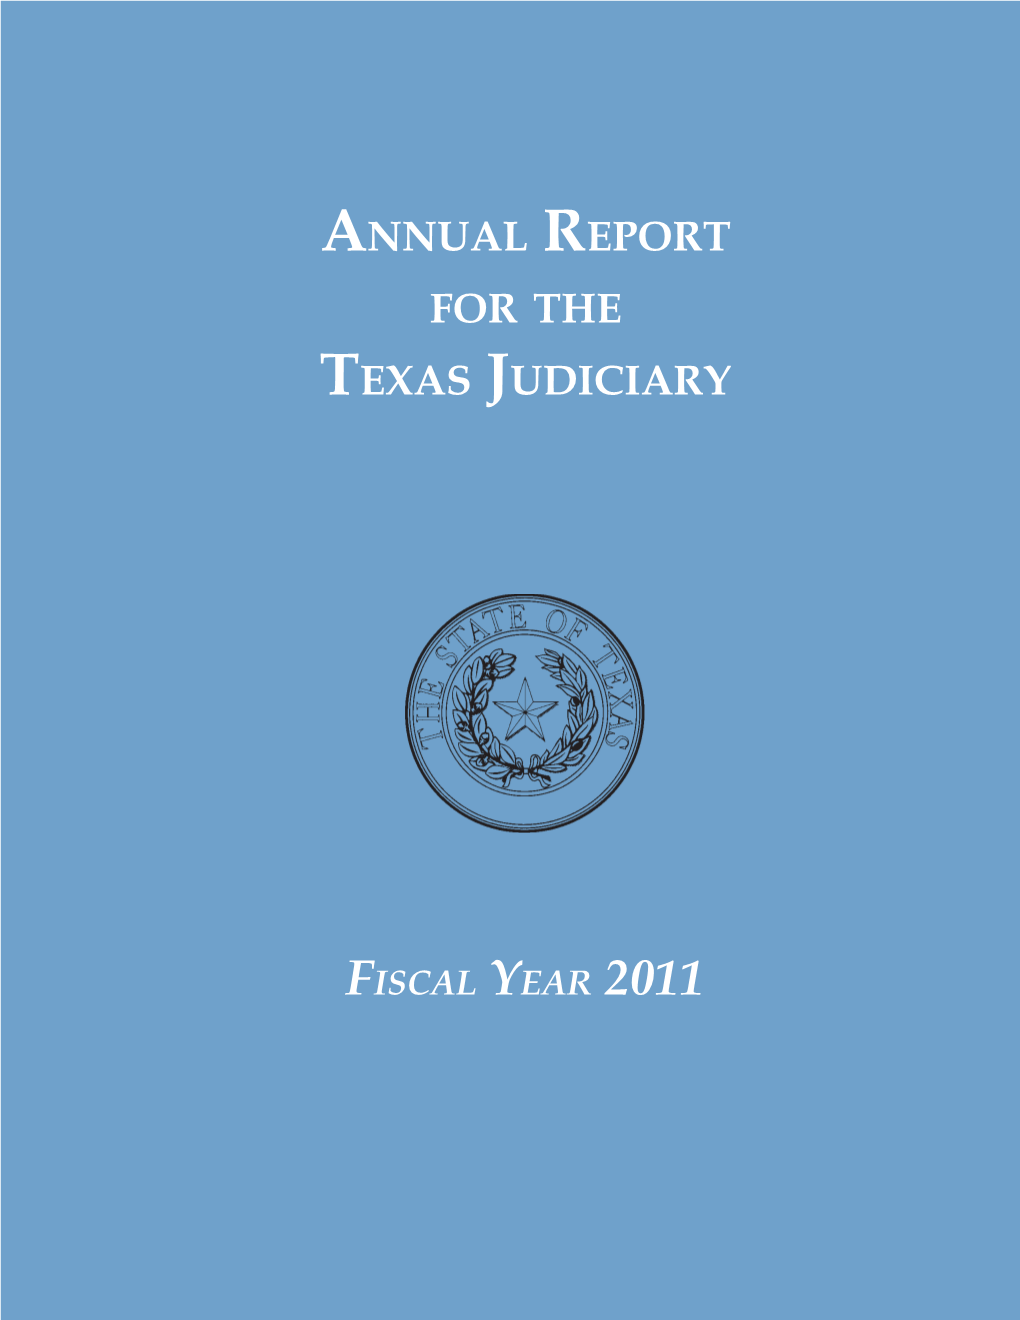 Annual Report for the Texas Judiciary